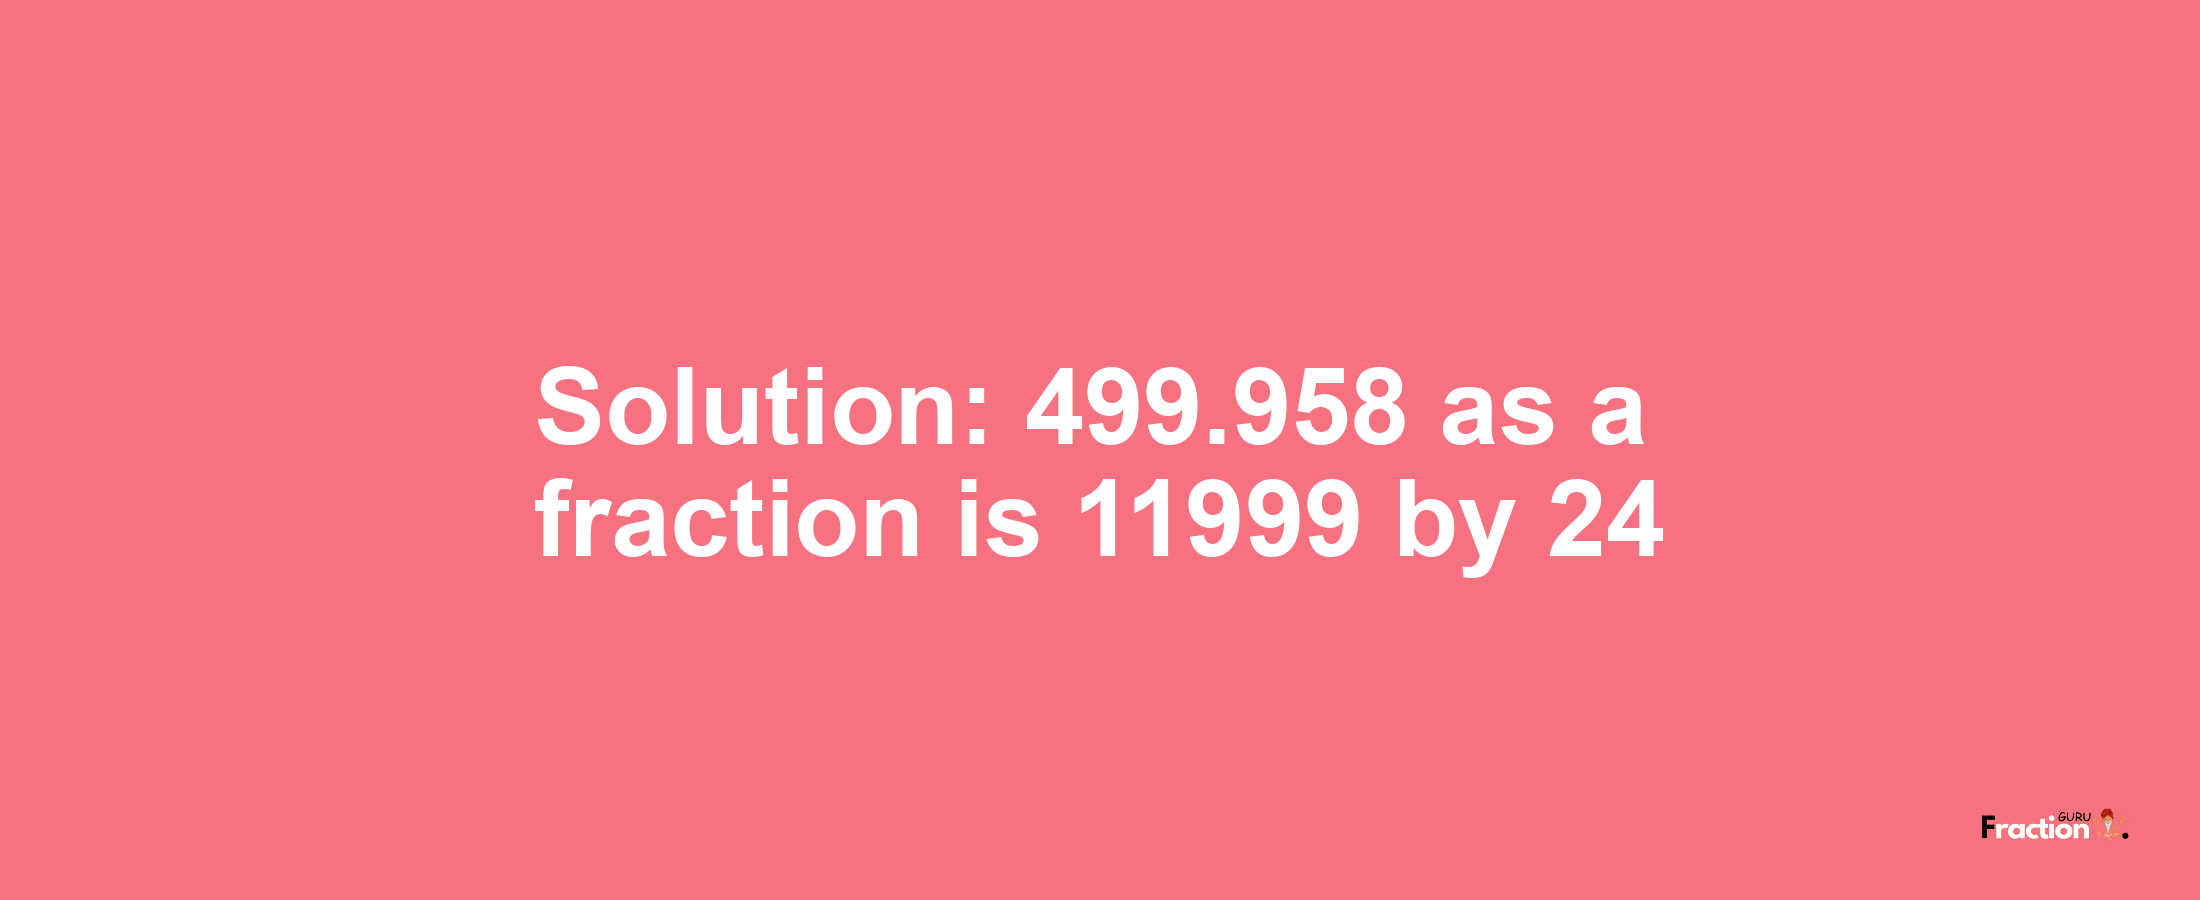 Solution:499.958 as a fraction is 11999/24